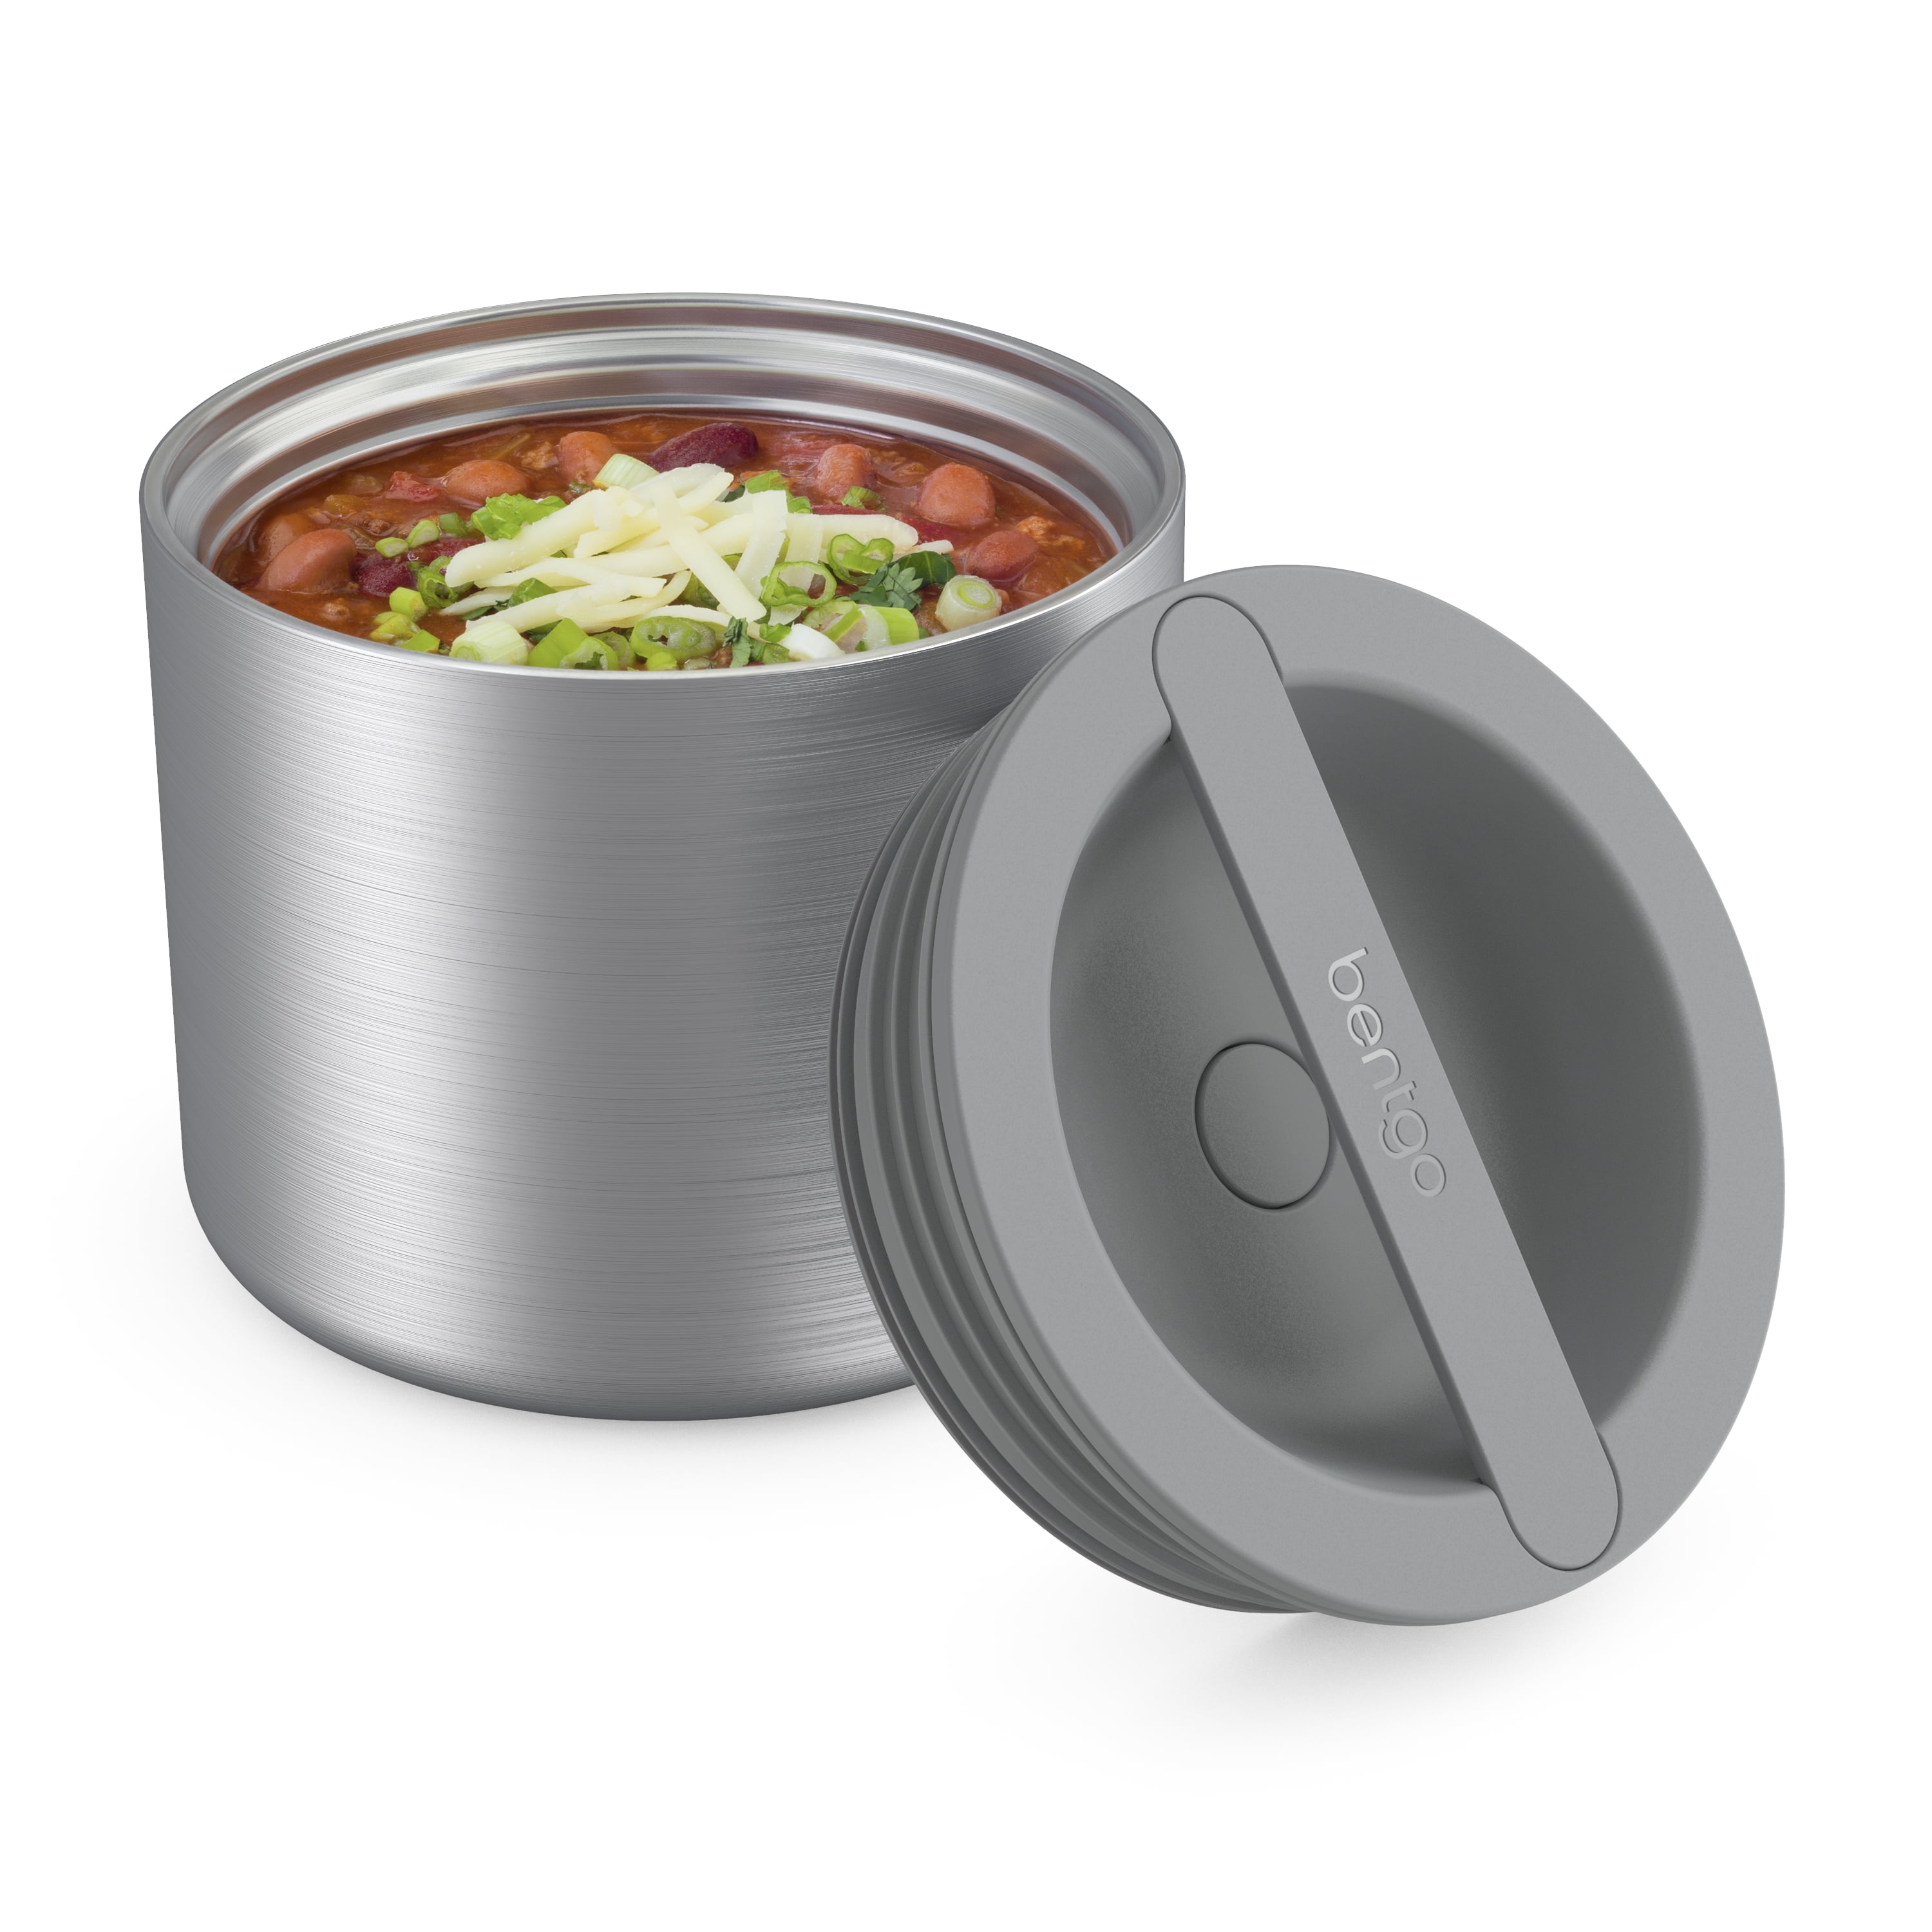 Lwithszg Stainless Insulated Food Container Leak-Proof Lid, Wide Mouth Design - Stainless Steel Thermos Soup Cup, Food-grade Materials, Ideal for Cool